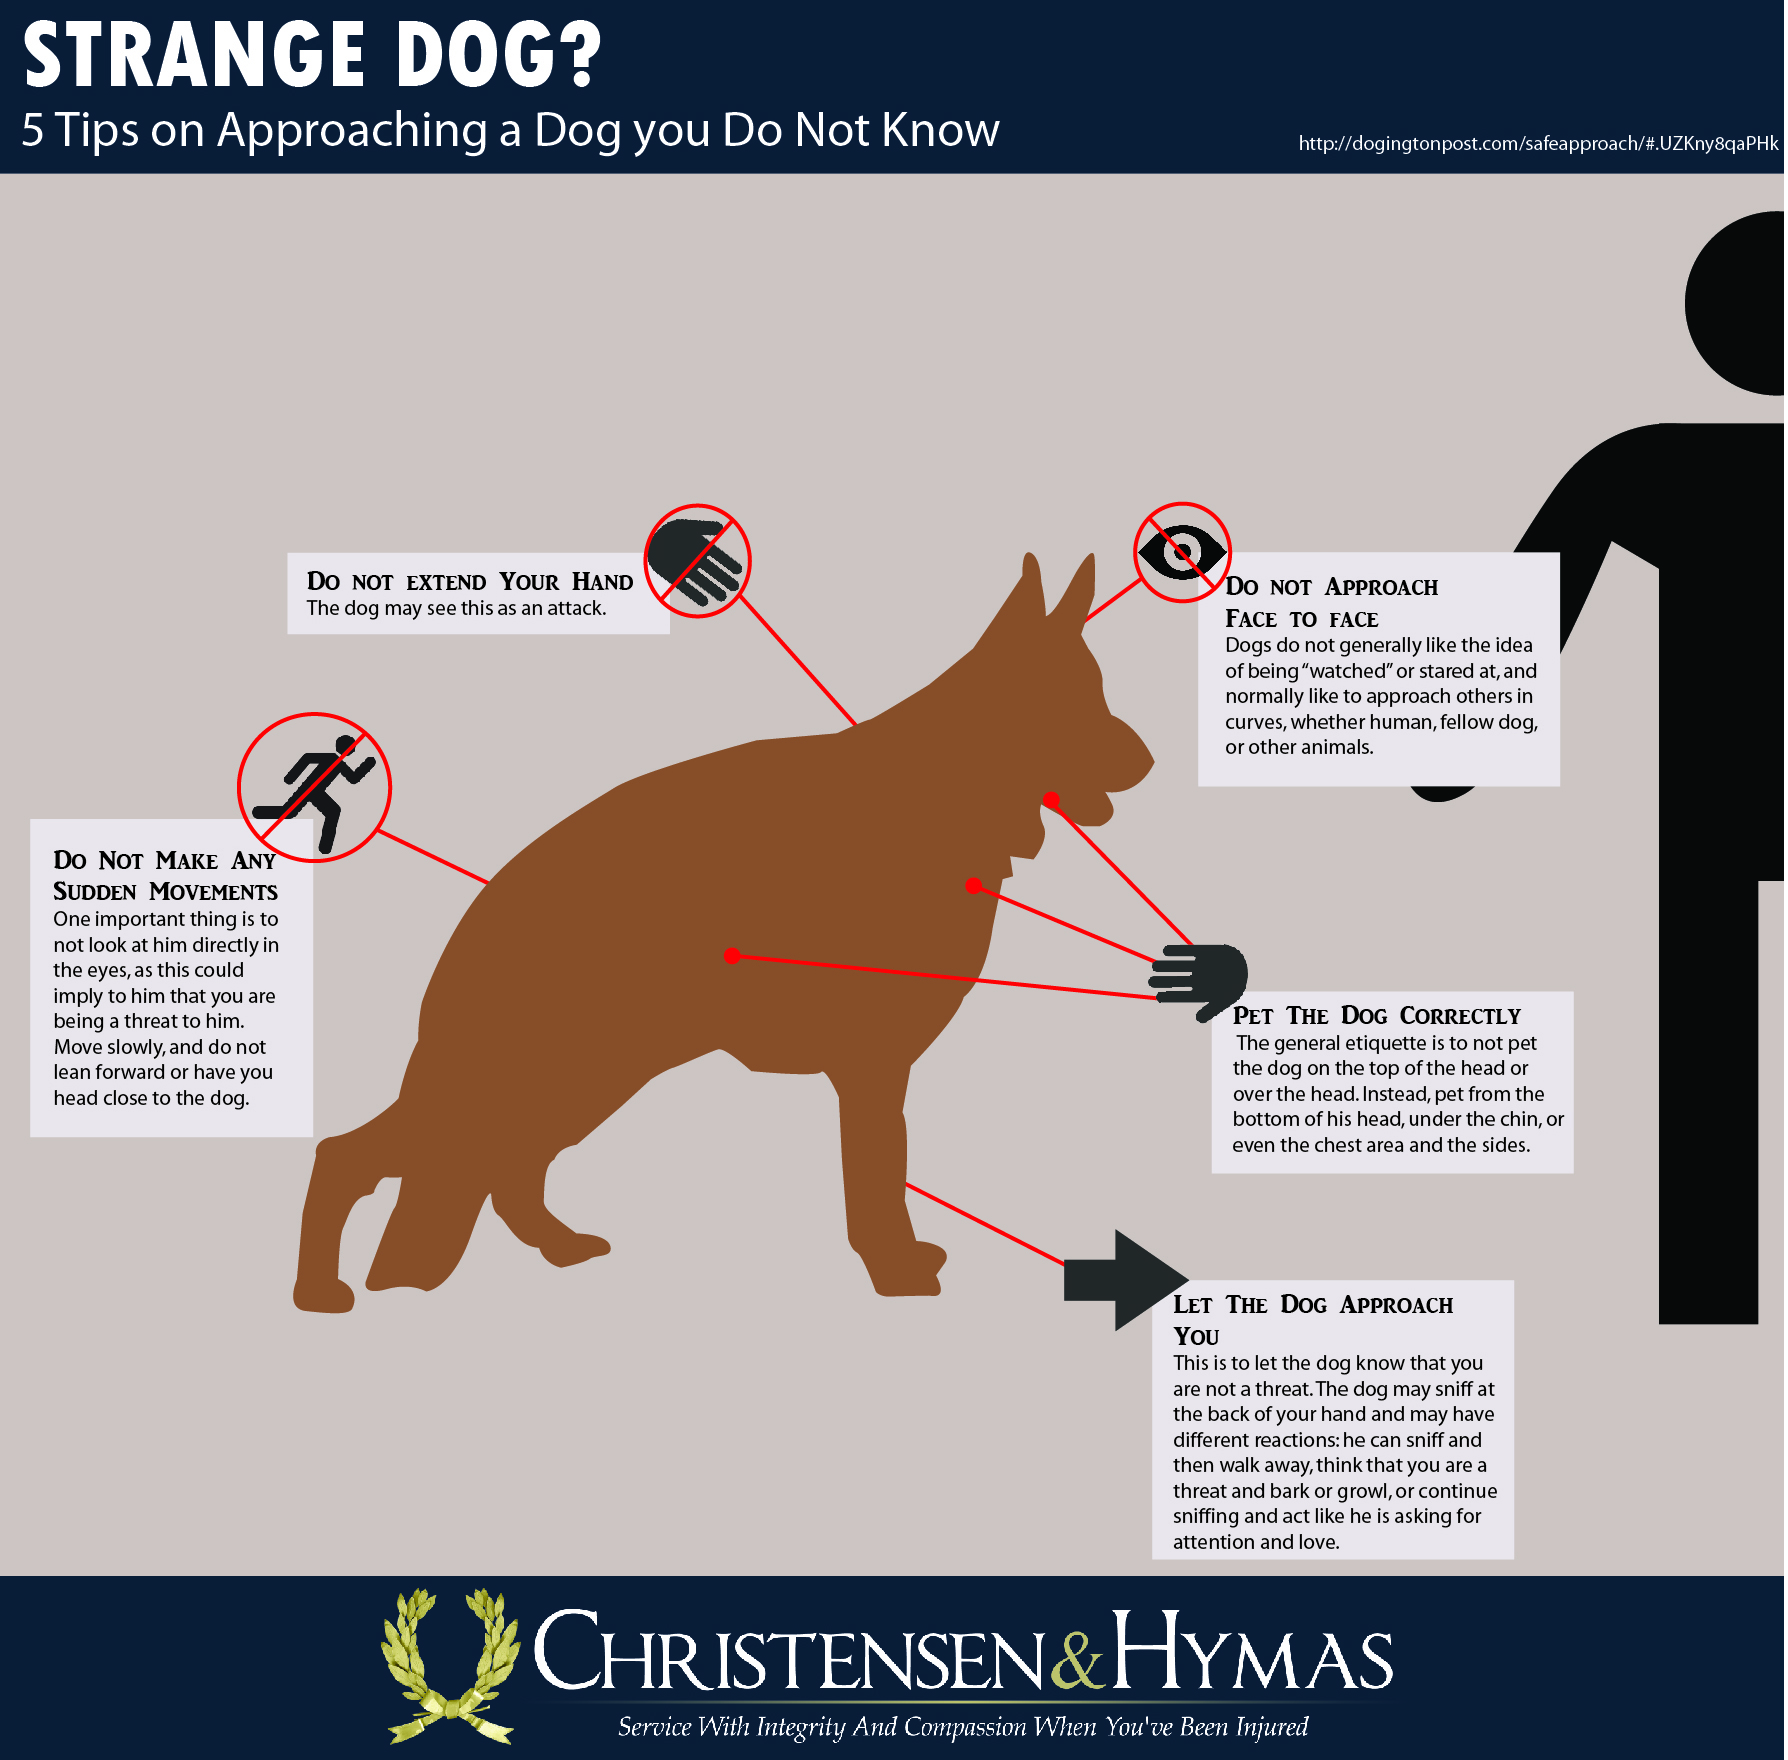 Infographic sharing tips on how to approach a strange dog